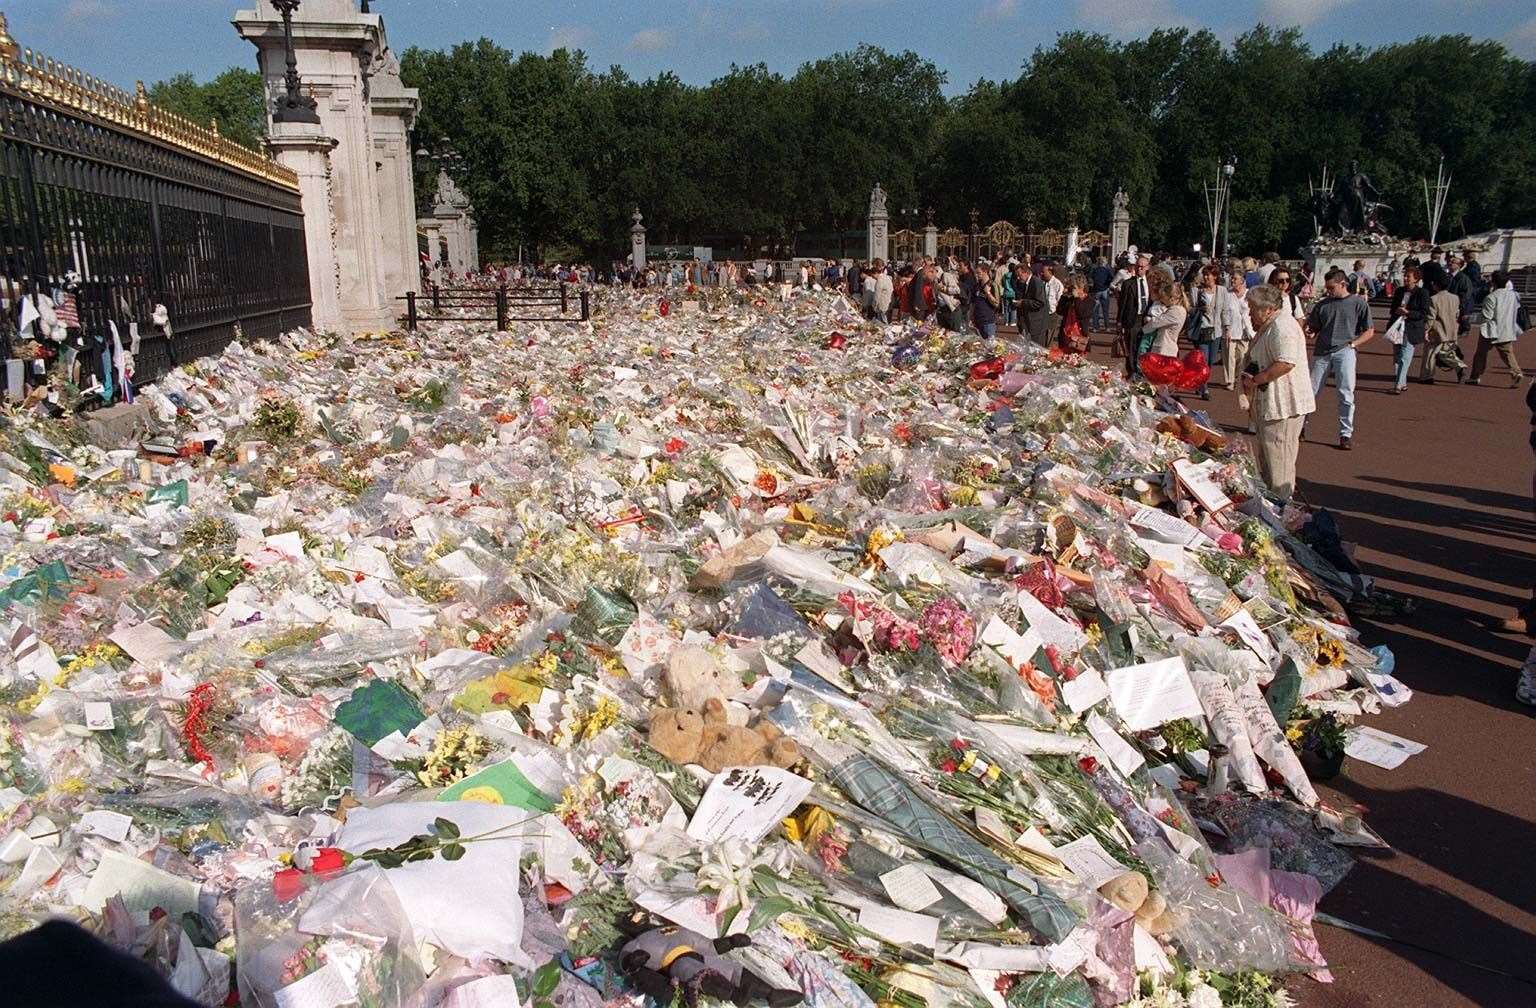 Banks of flowers were laid in tribute to Diana (Ben Curtis/PA)